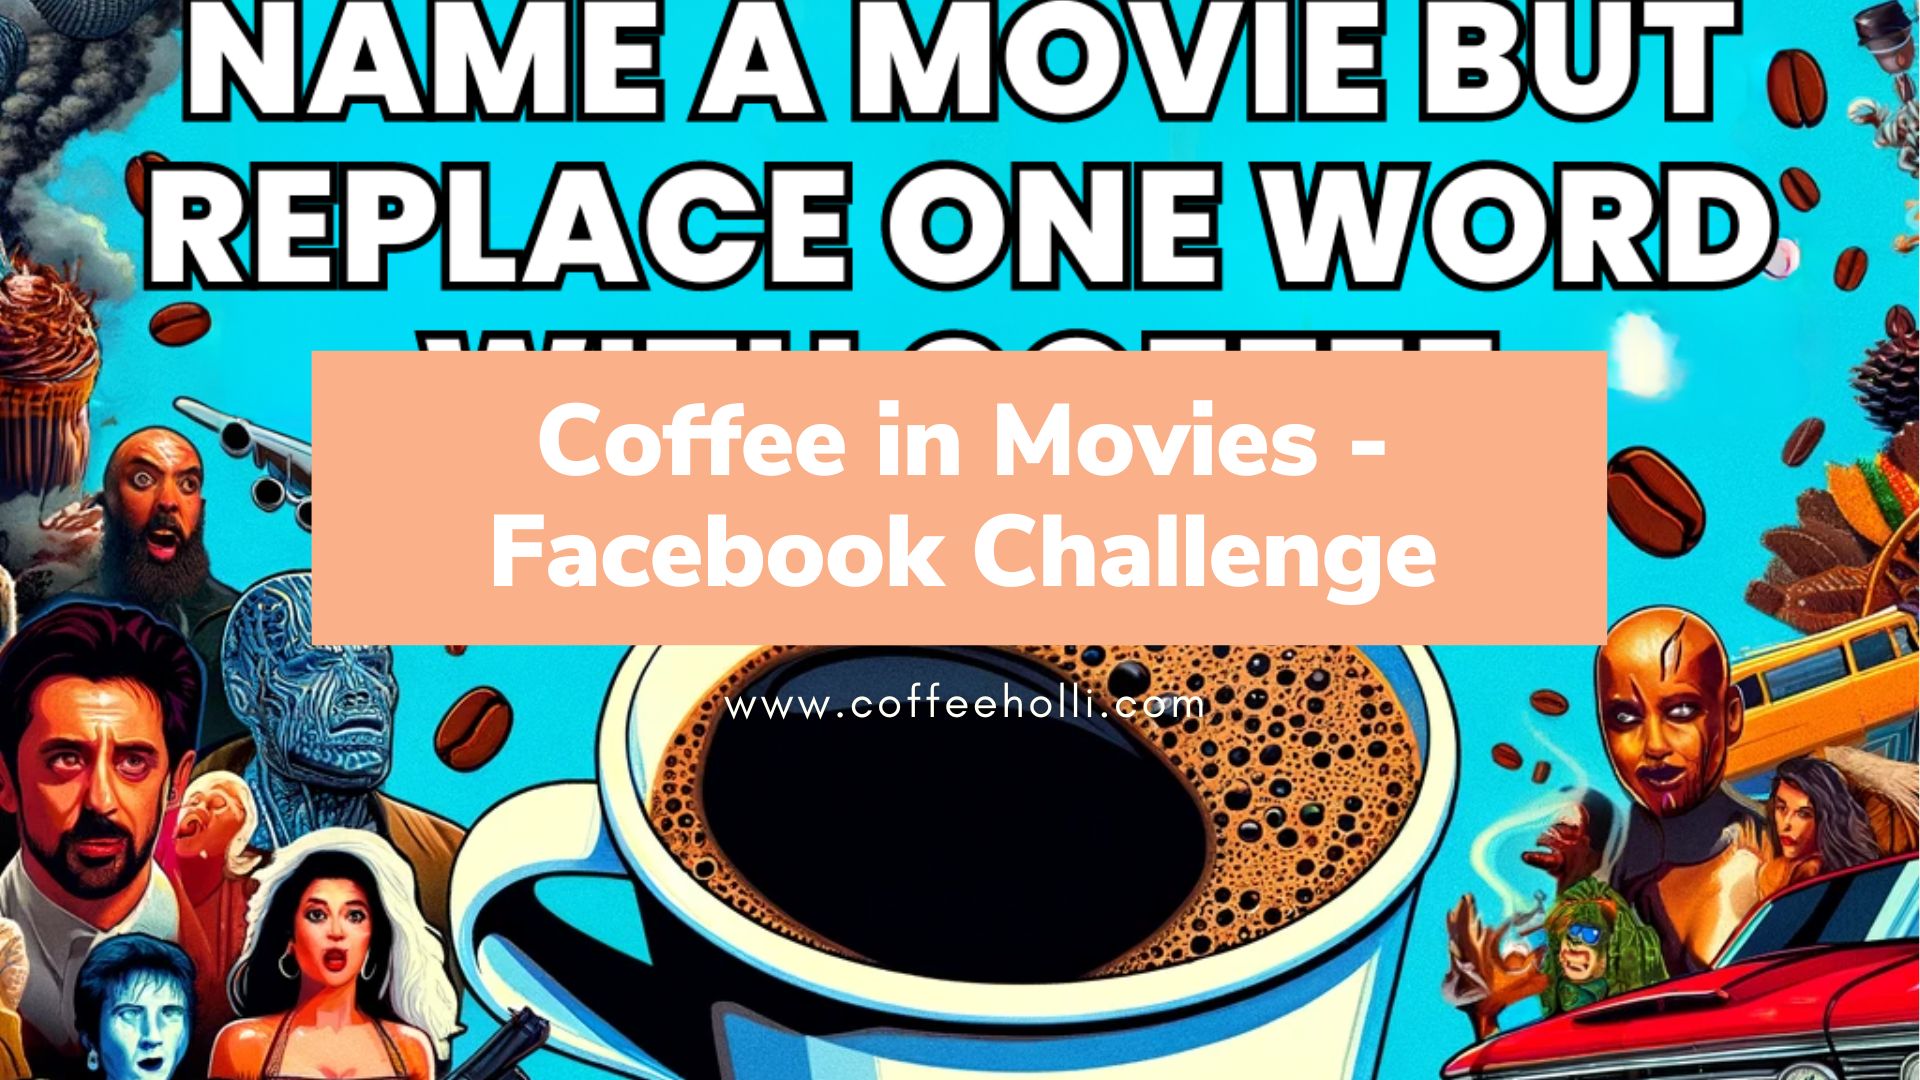 Name a movie but replace one word with coffee facebook challenge